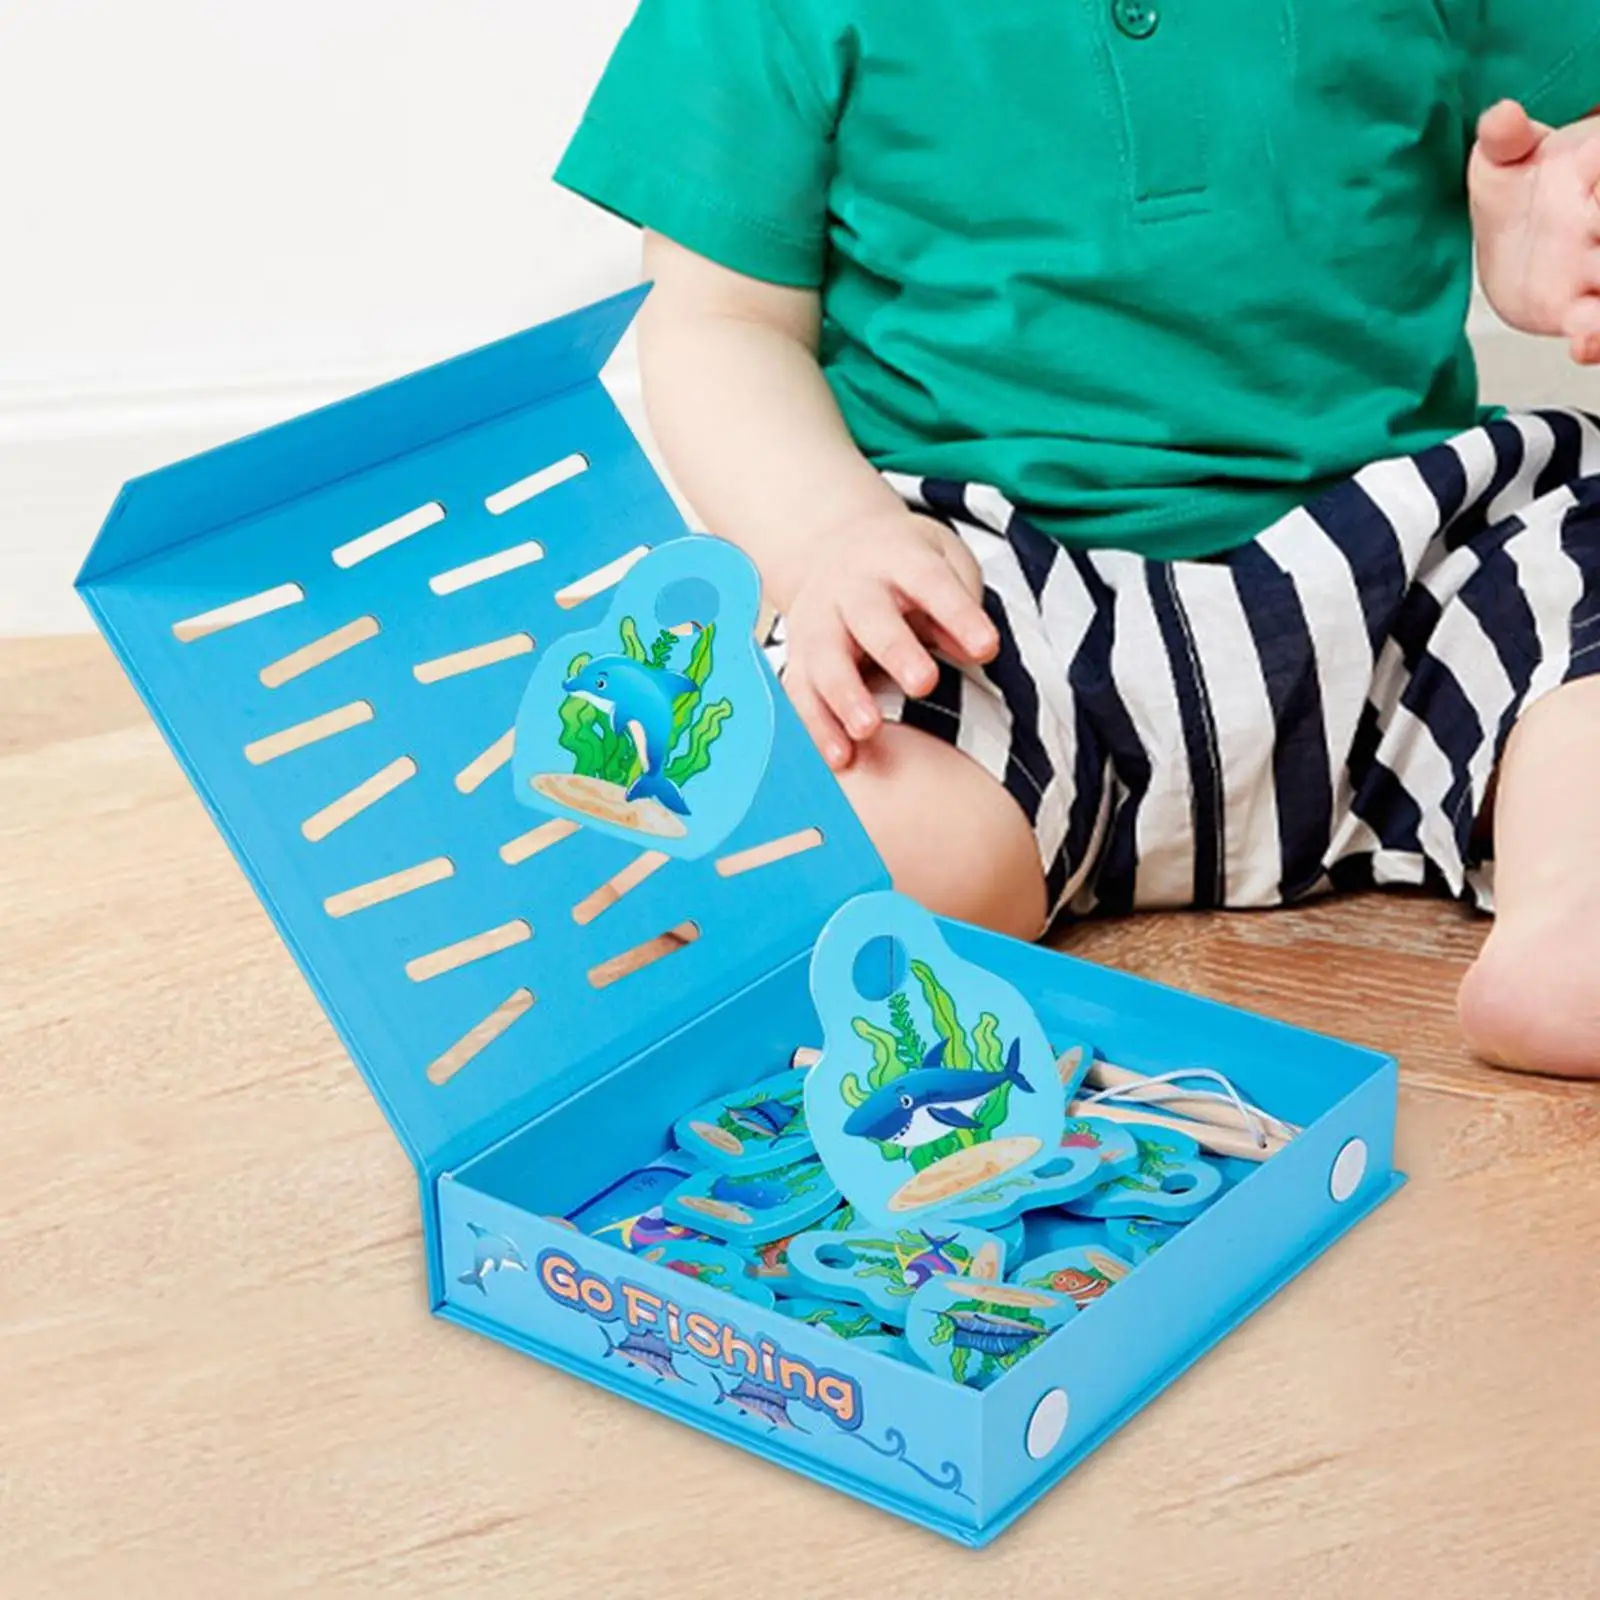 Wooden Fishing Toy Game with 10 Aquatic Creatures Board Game Toy Fine Motor Skill for Preschool Birthday Gift Toddlers Kids Baby